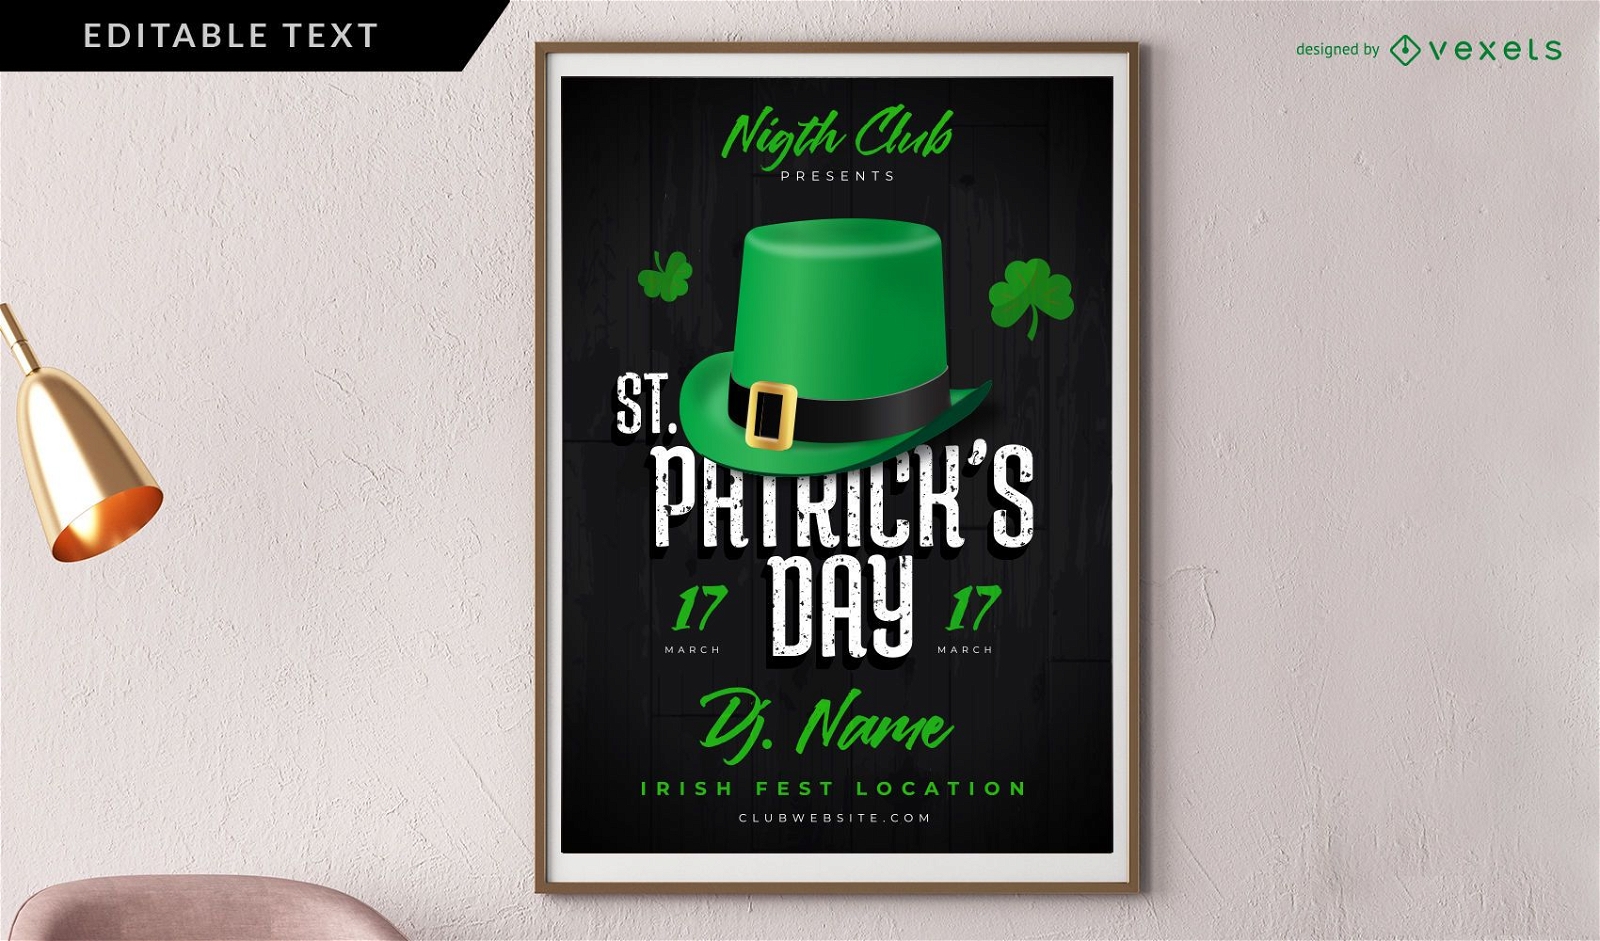 Saint Patrick's Day Party Poster